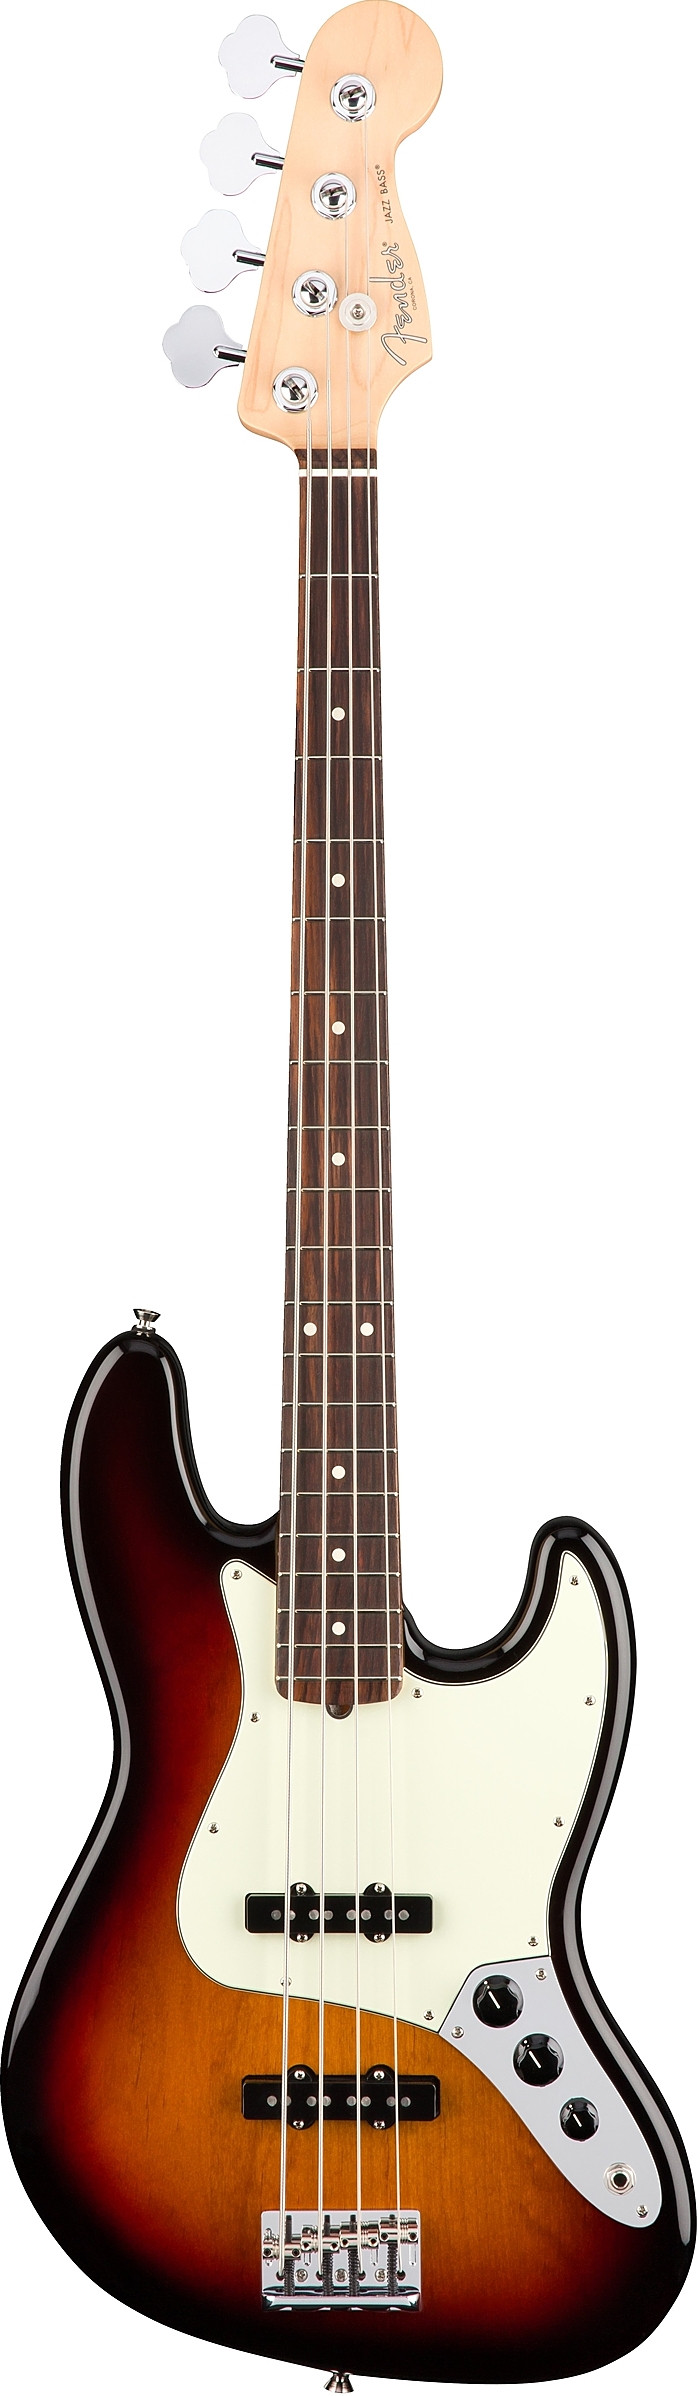 American Professional Jazz Bass by Fender